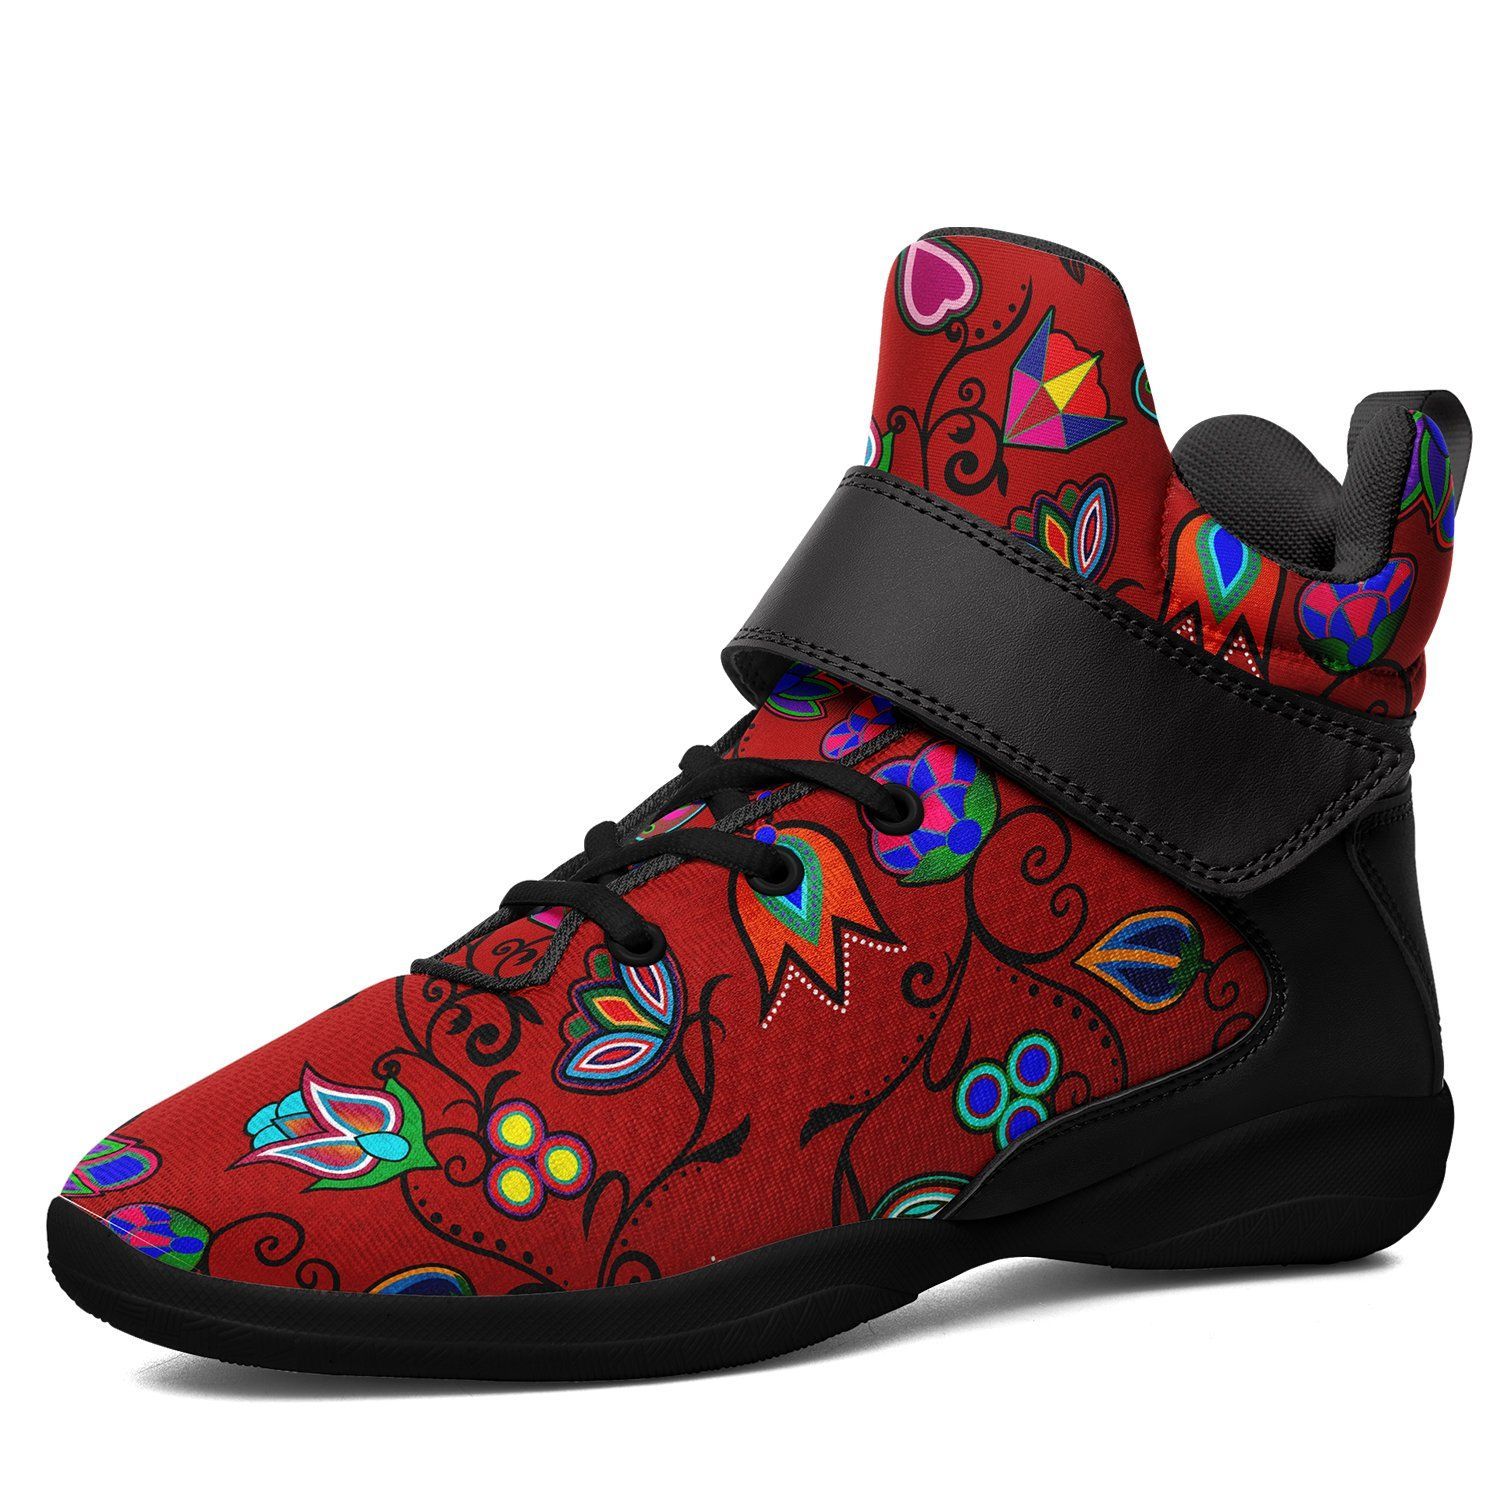 Indigenous Paisley Dahlia Kid's Ipottaa Basketball / Sport High Top Shoes 49 Dzine US Child 12.5 / EUR 30 Black Sole with Black Strap 